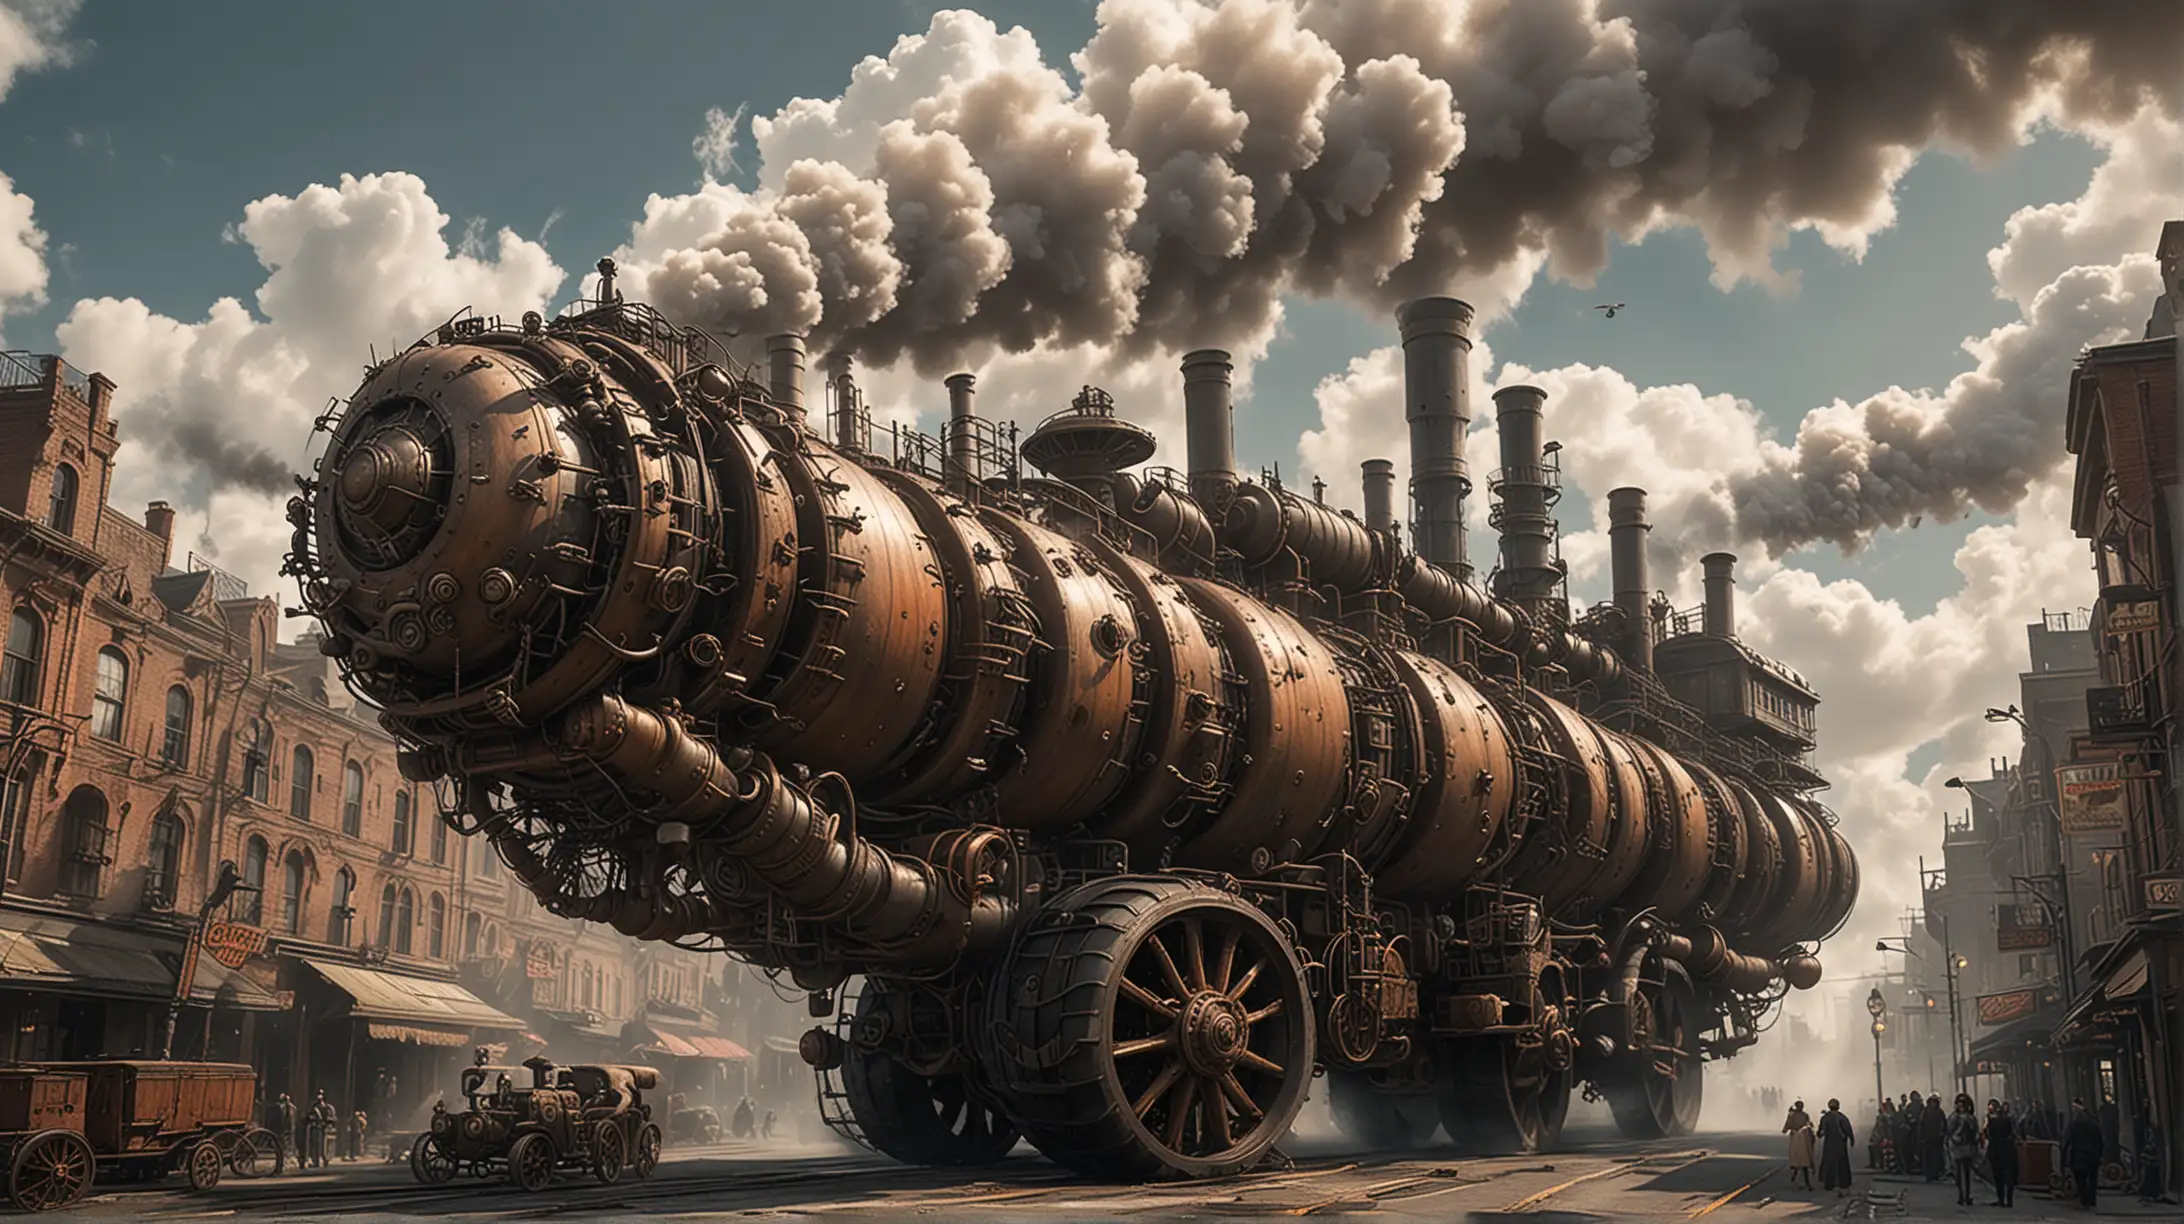 Steampunk mobile city similar to those from Mortal Engines film. Giant caterpillar wheels, large vertical exhaust pipes, big steam engines. Much steam and smoke. The city goes throug the wilderness. Sunny and cloudy.